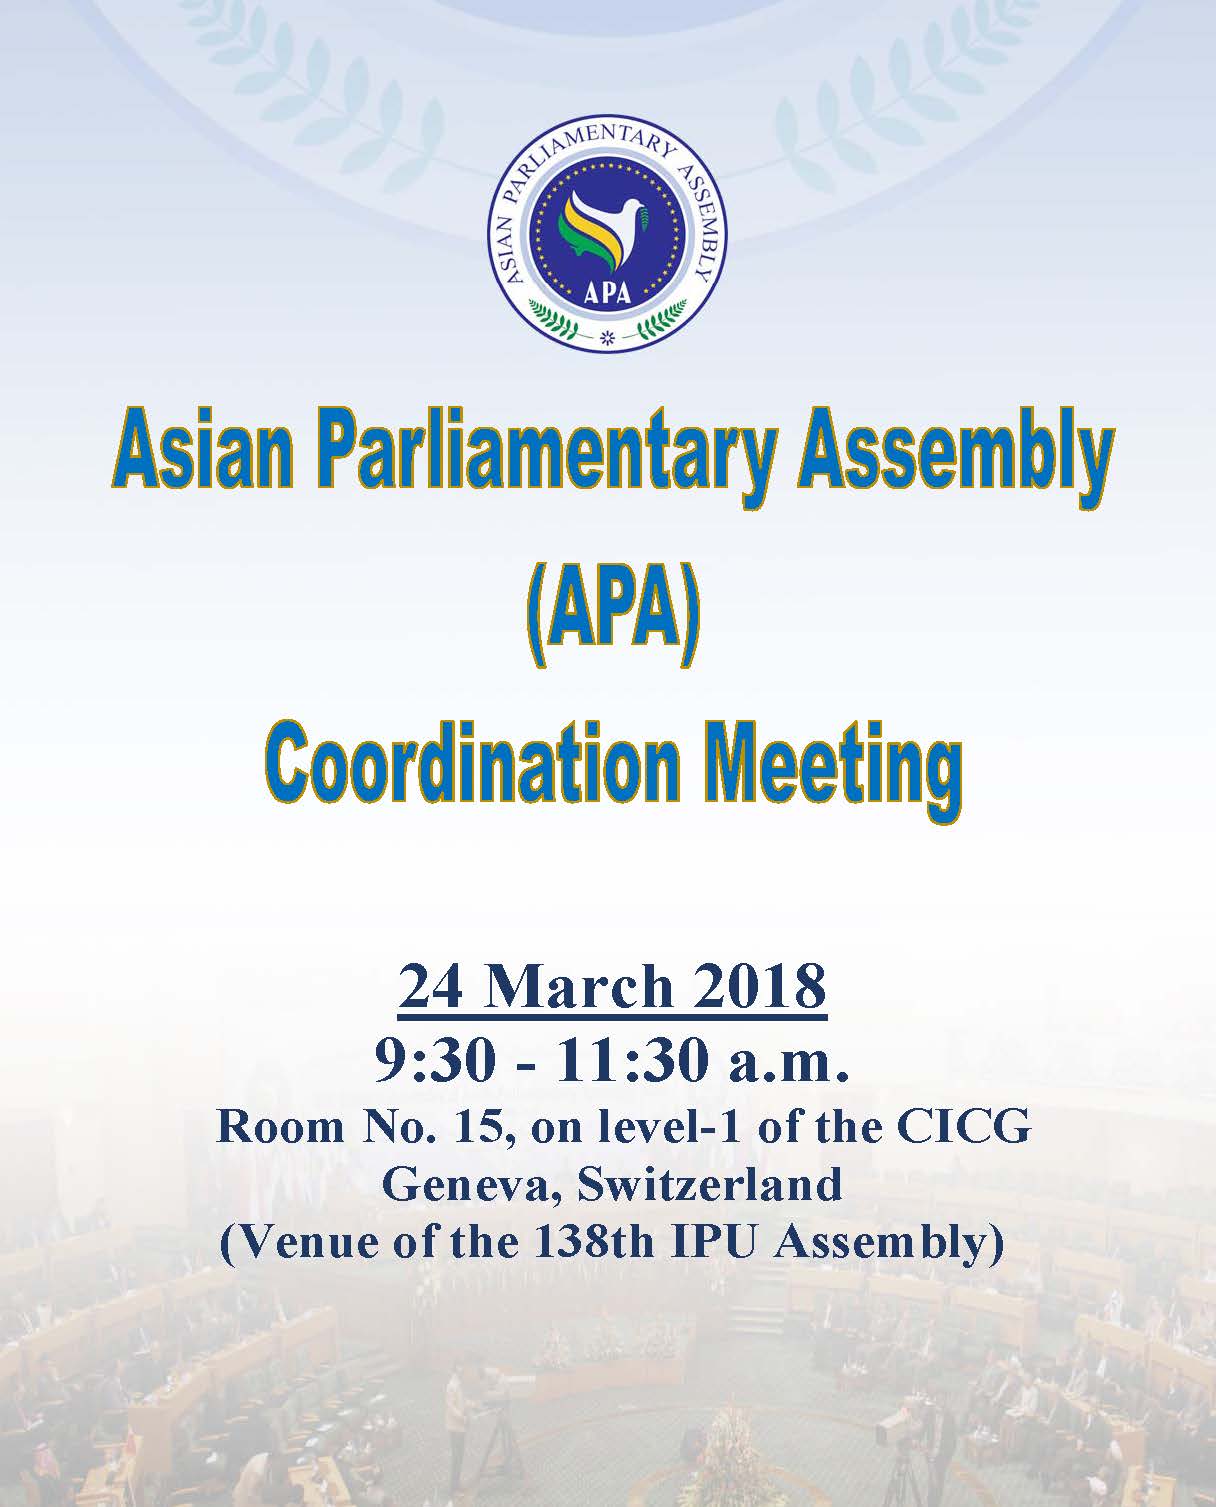  APA Coordination and Cooperation meeting in the sideline of  138th IPU Assembly